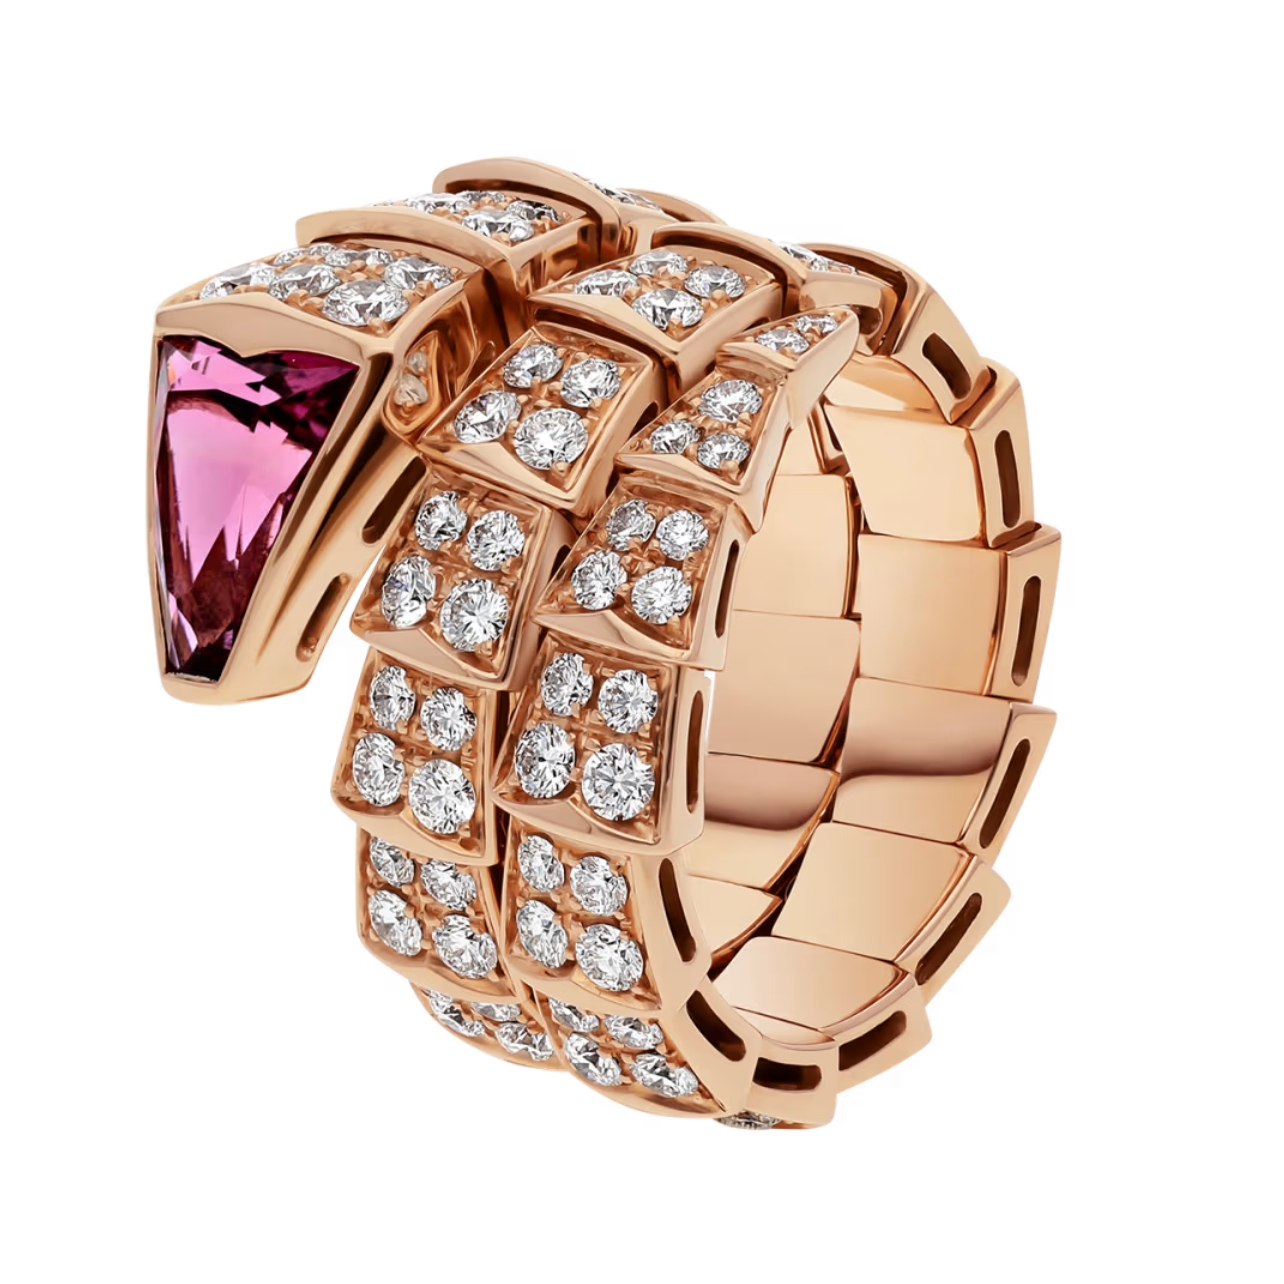 Bulgari serpenti viper ring in rose gold with pave diamonds and rubellite on the head